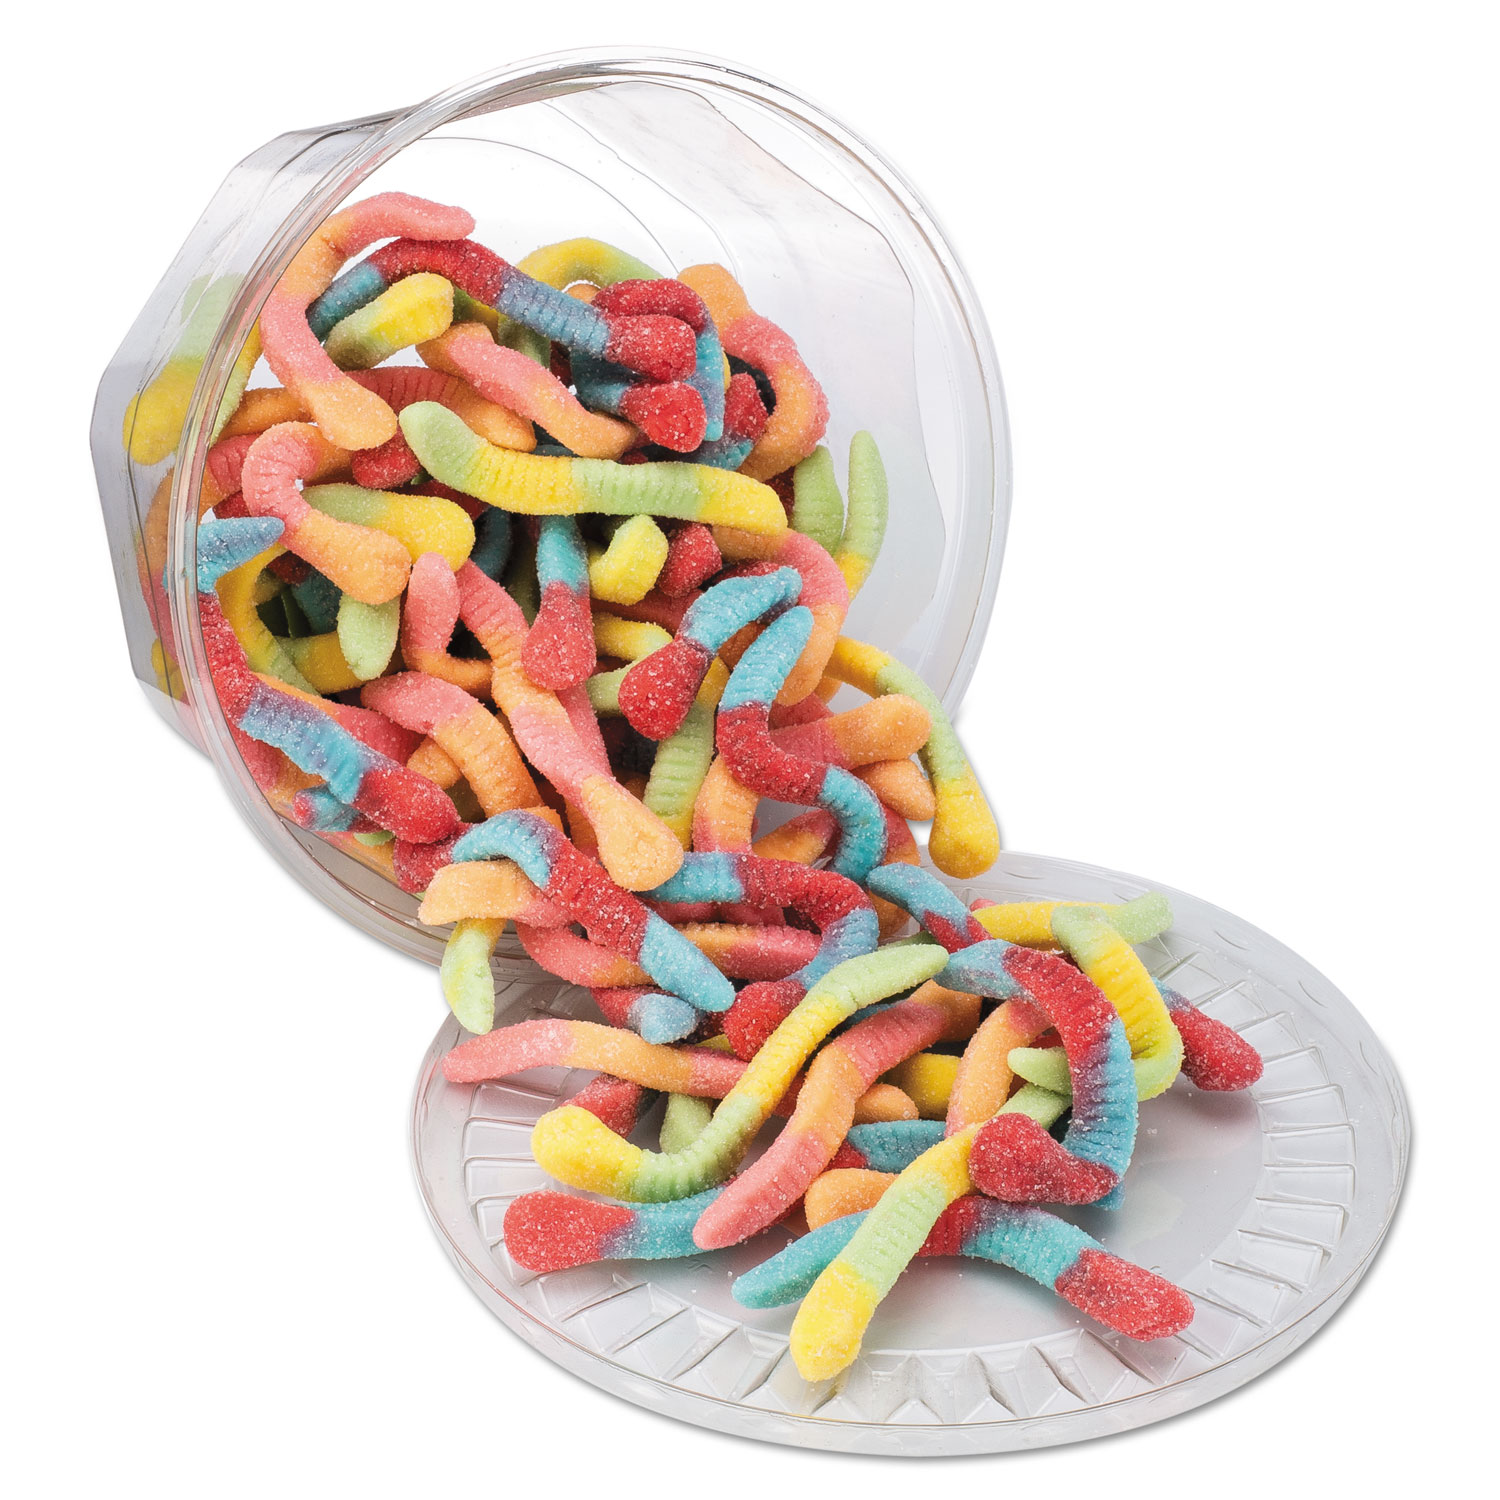 Candy Assortments, Sour Neon Worms, Tub, 1.75 lb